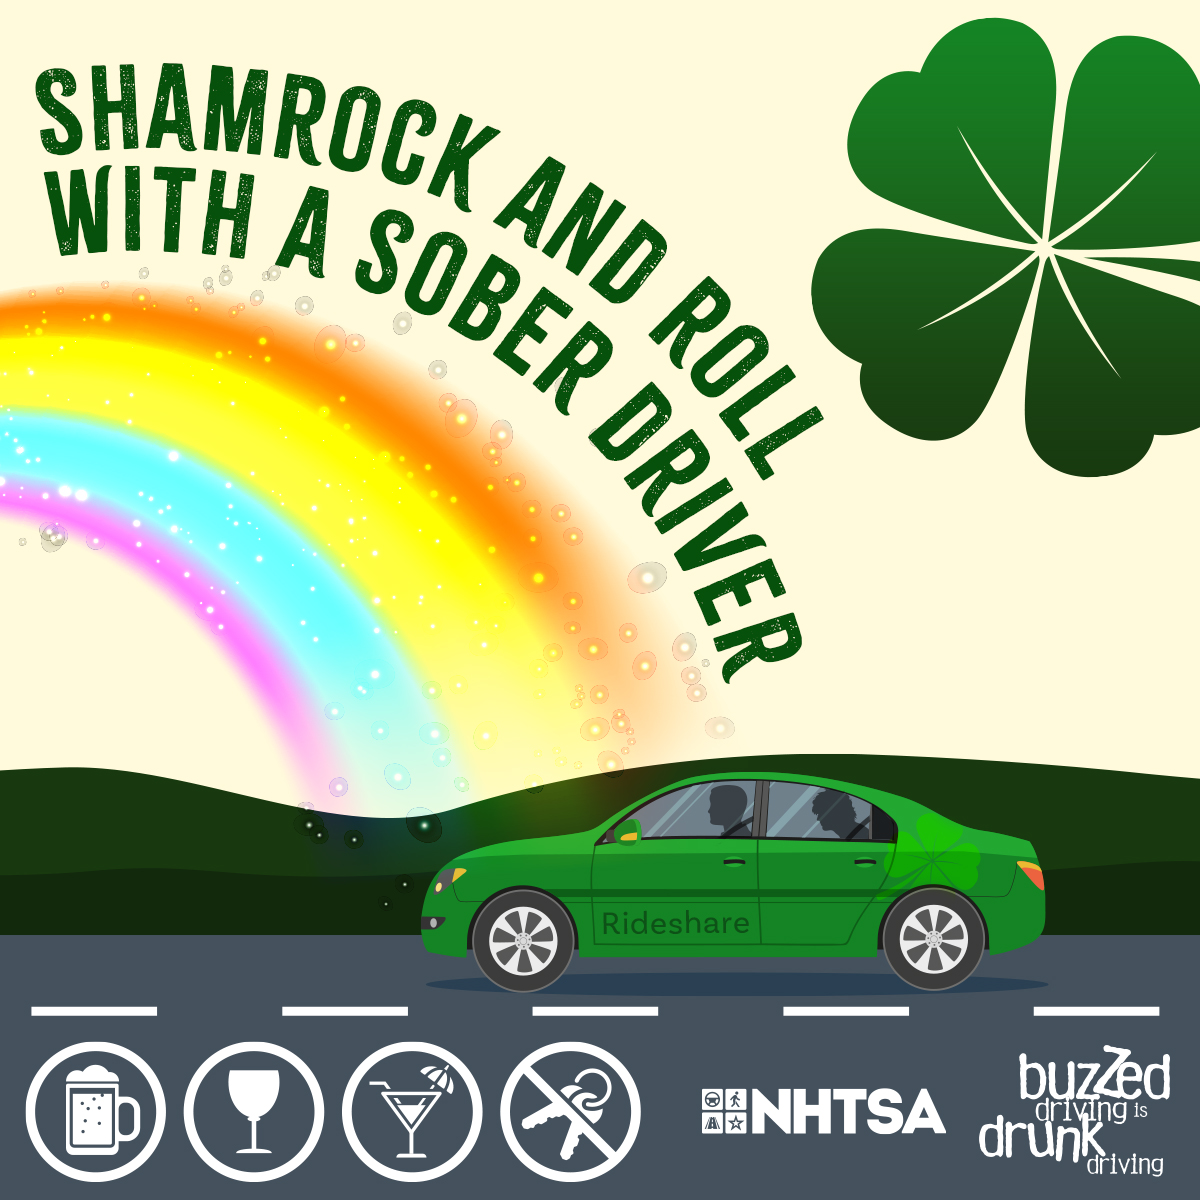 St. Patrick's Day is quickly approaching. Get your checklist ready: 🍀 Coordinate your designated driver. 🍀 Remember to wear green! 🍀 Enjoy a green beverage. 🍻 🍀 #BuzzedDriving is Drunk Driving